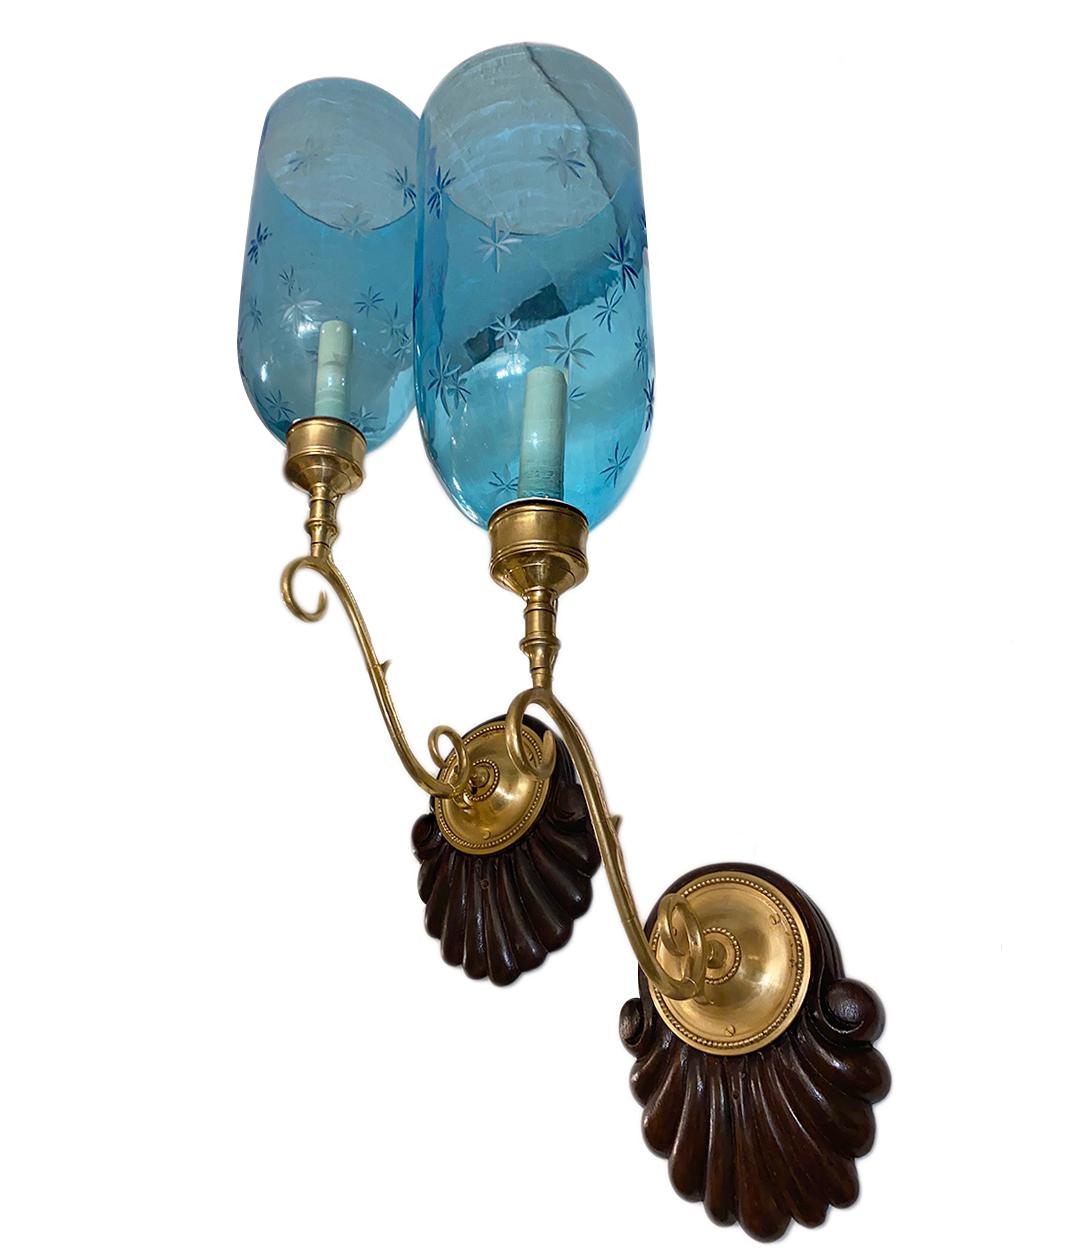 A set of four circa 1940's Anglo-Indian single-light sconces with carved wood backplates and etched blue glass hurricanes. Sold per pair.

Measurements:
Height: 24